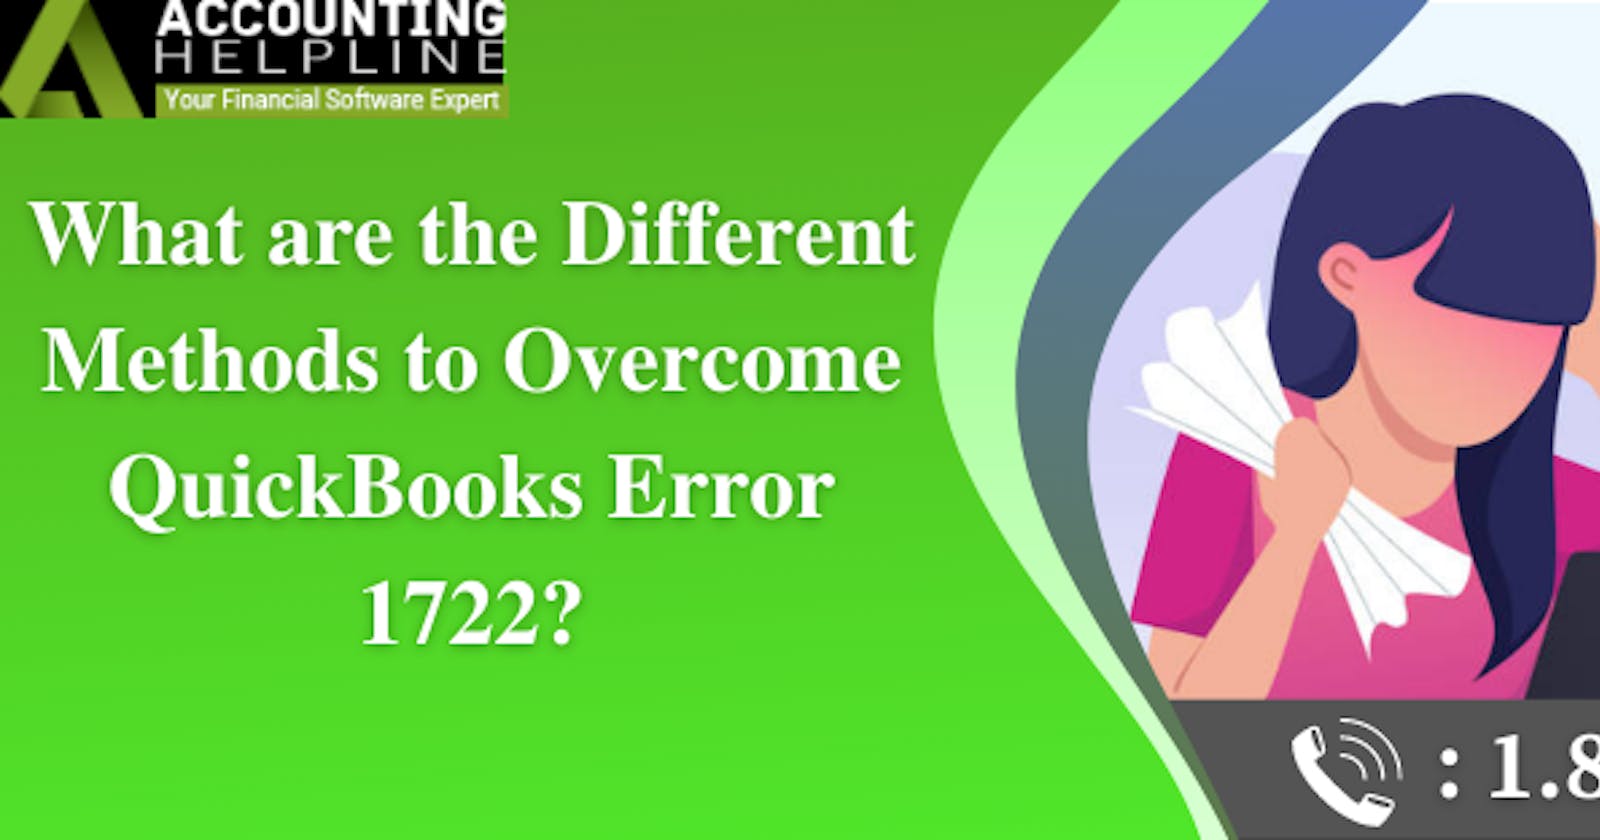 What are the Different Methods to Overcome QuickBooks Error 1722?